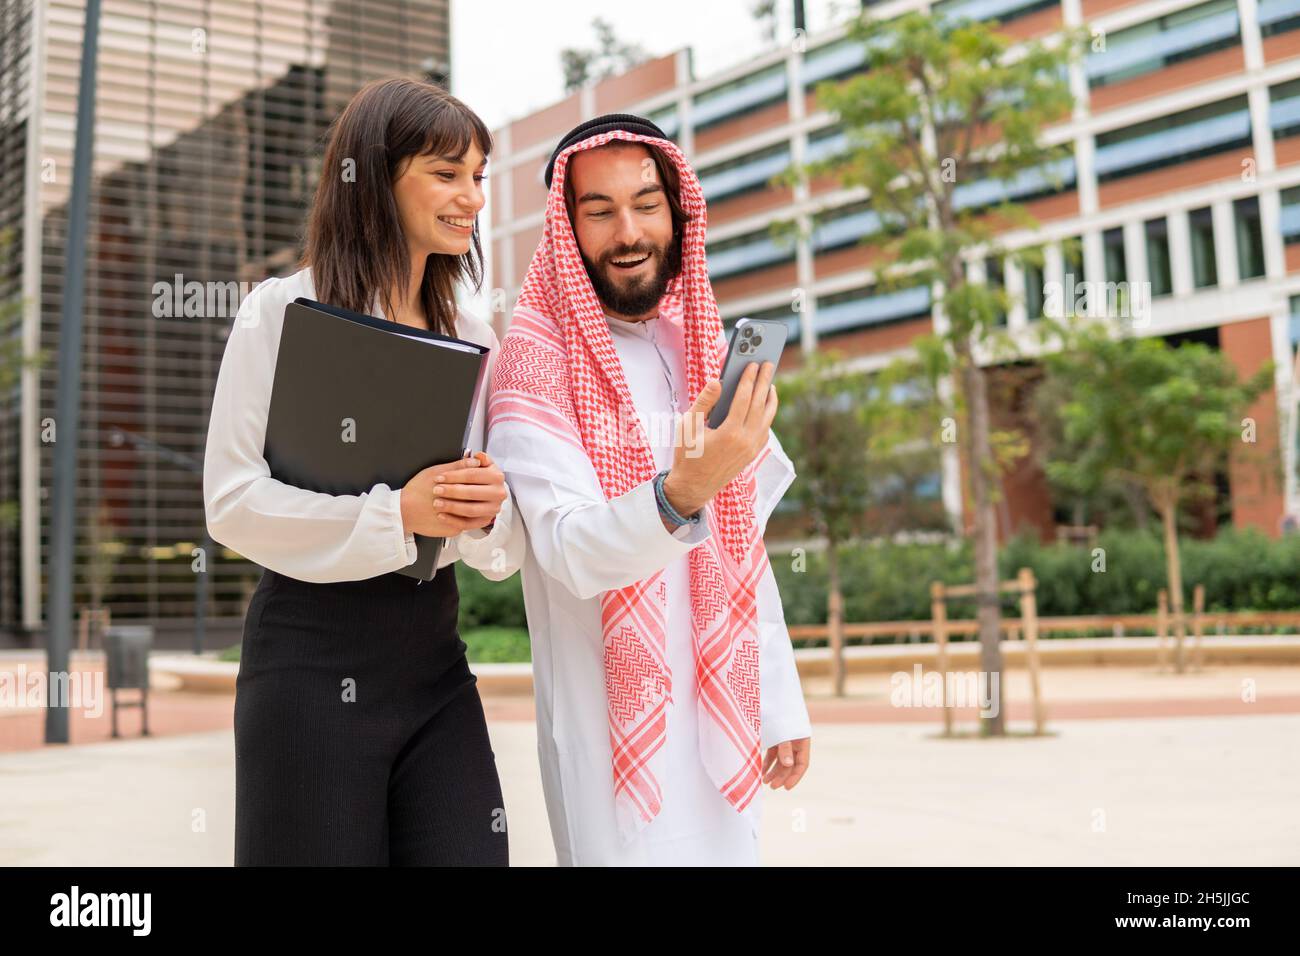 Happy Arab man smiling and showing video on smartphone to businesswoman while standing on street in city downtown Stock Photo